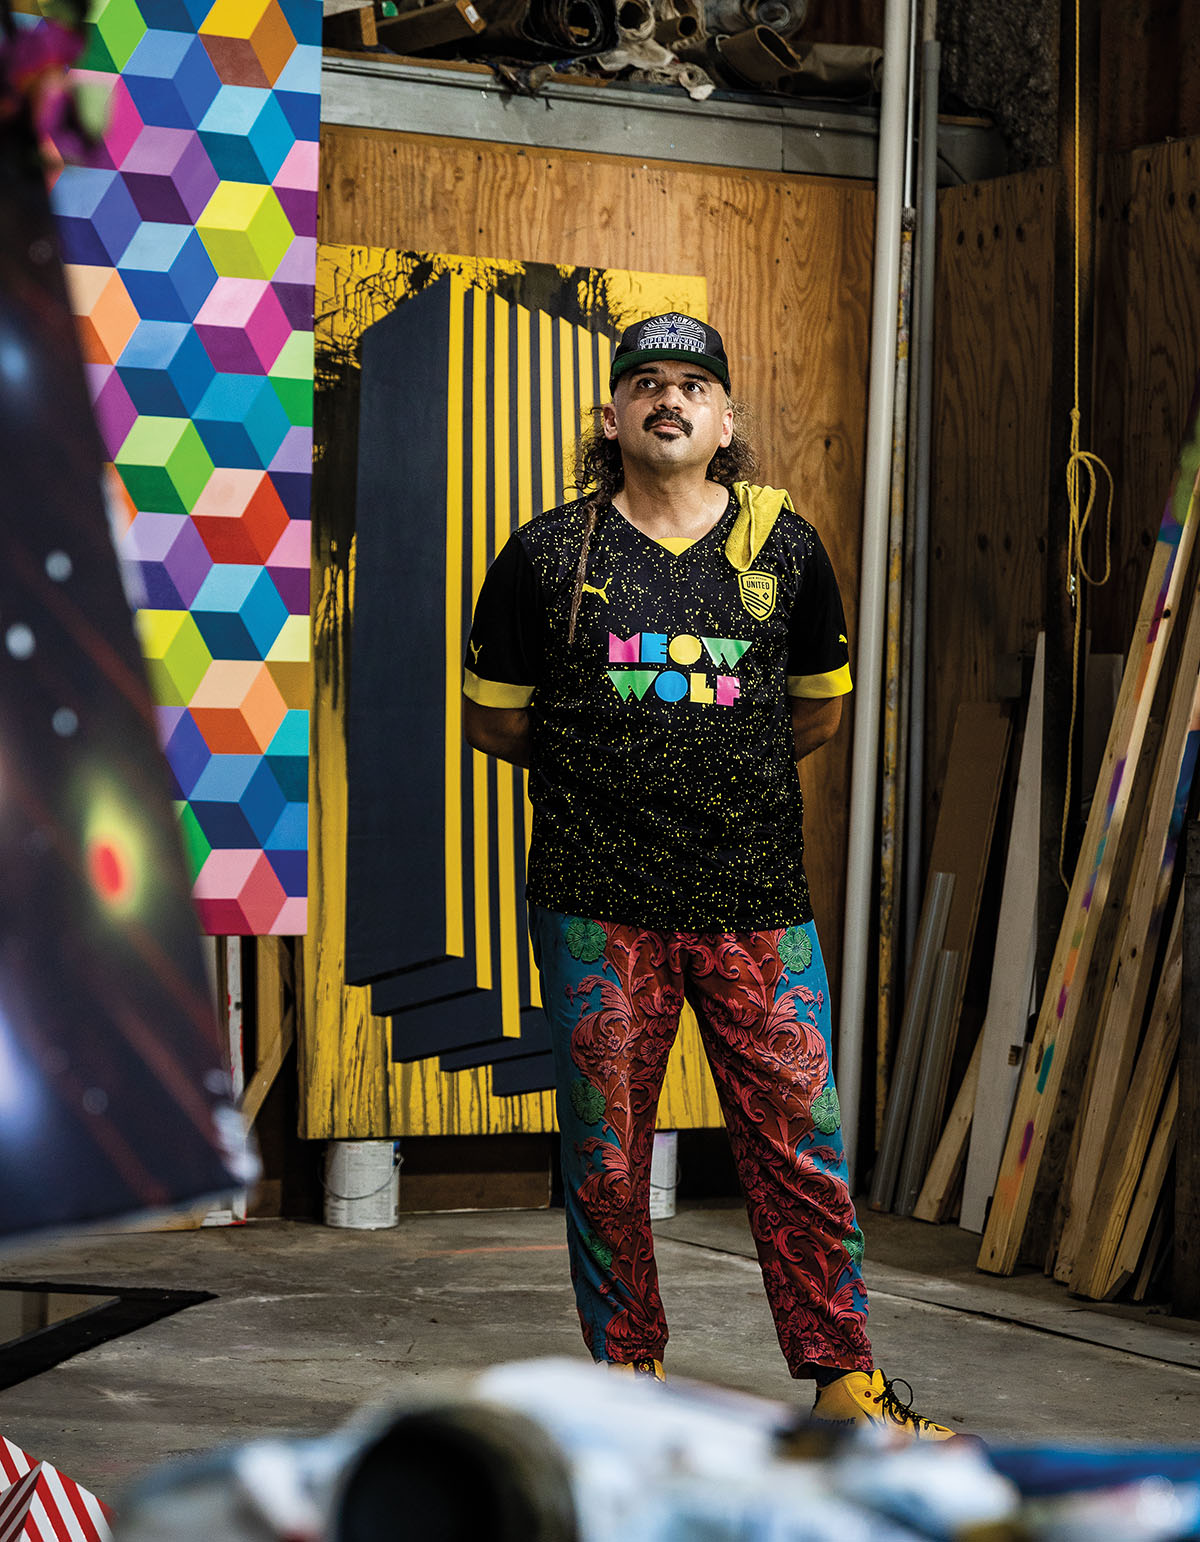 A man in a meow wolf t-shirt stands in a messy, colorful warehouse